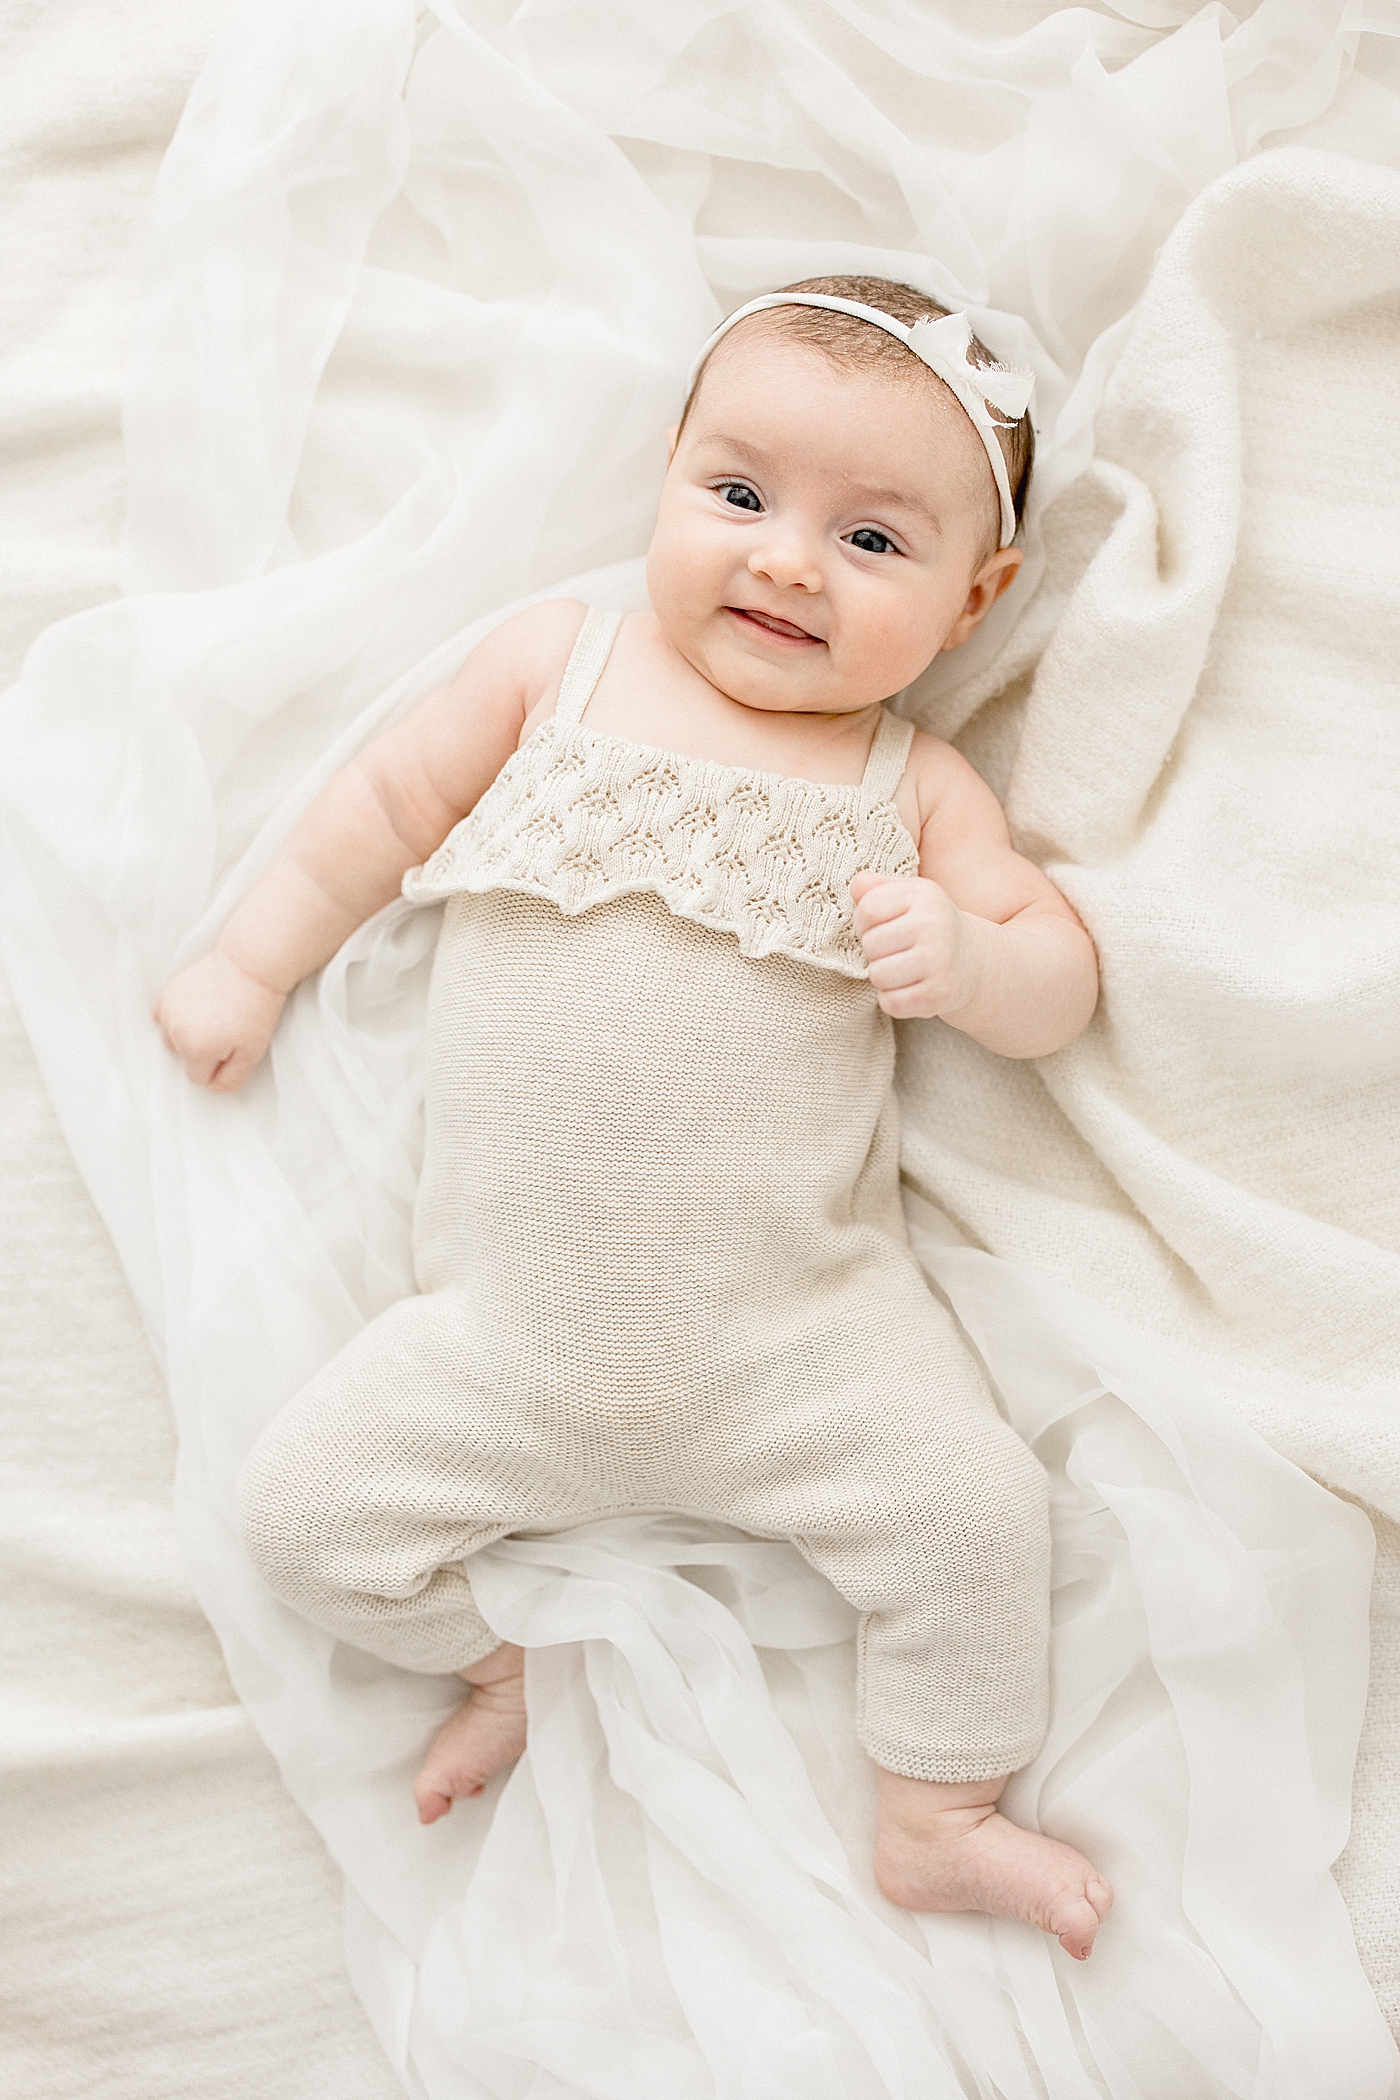 3 month milestone session. Photo by Brittany Elise Photography.